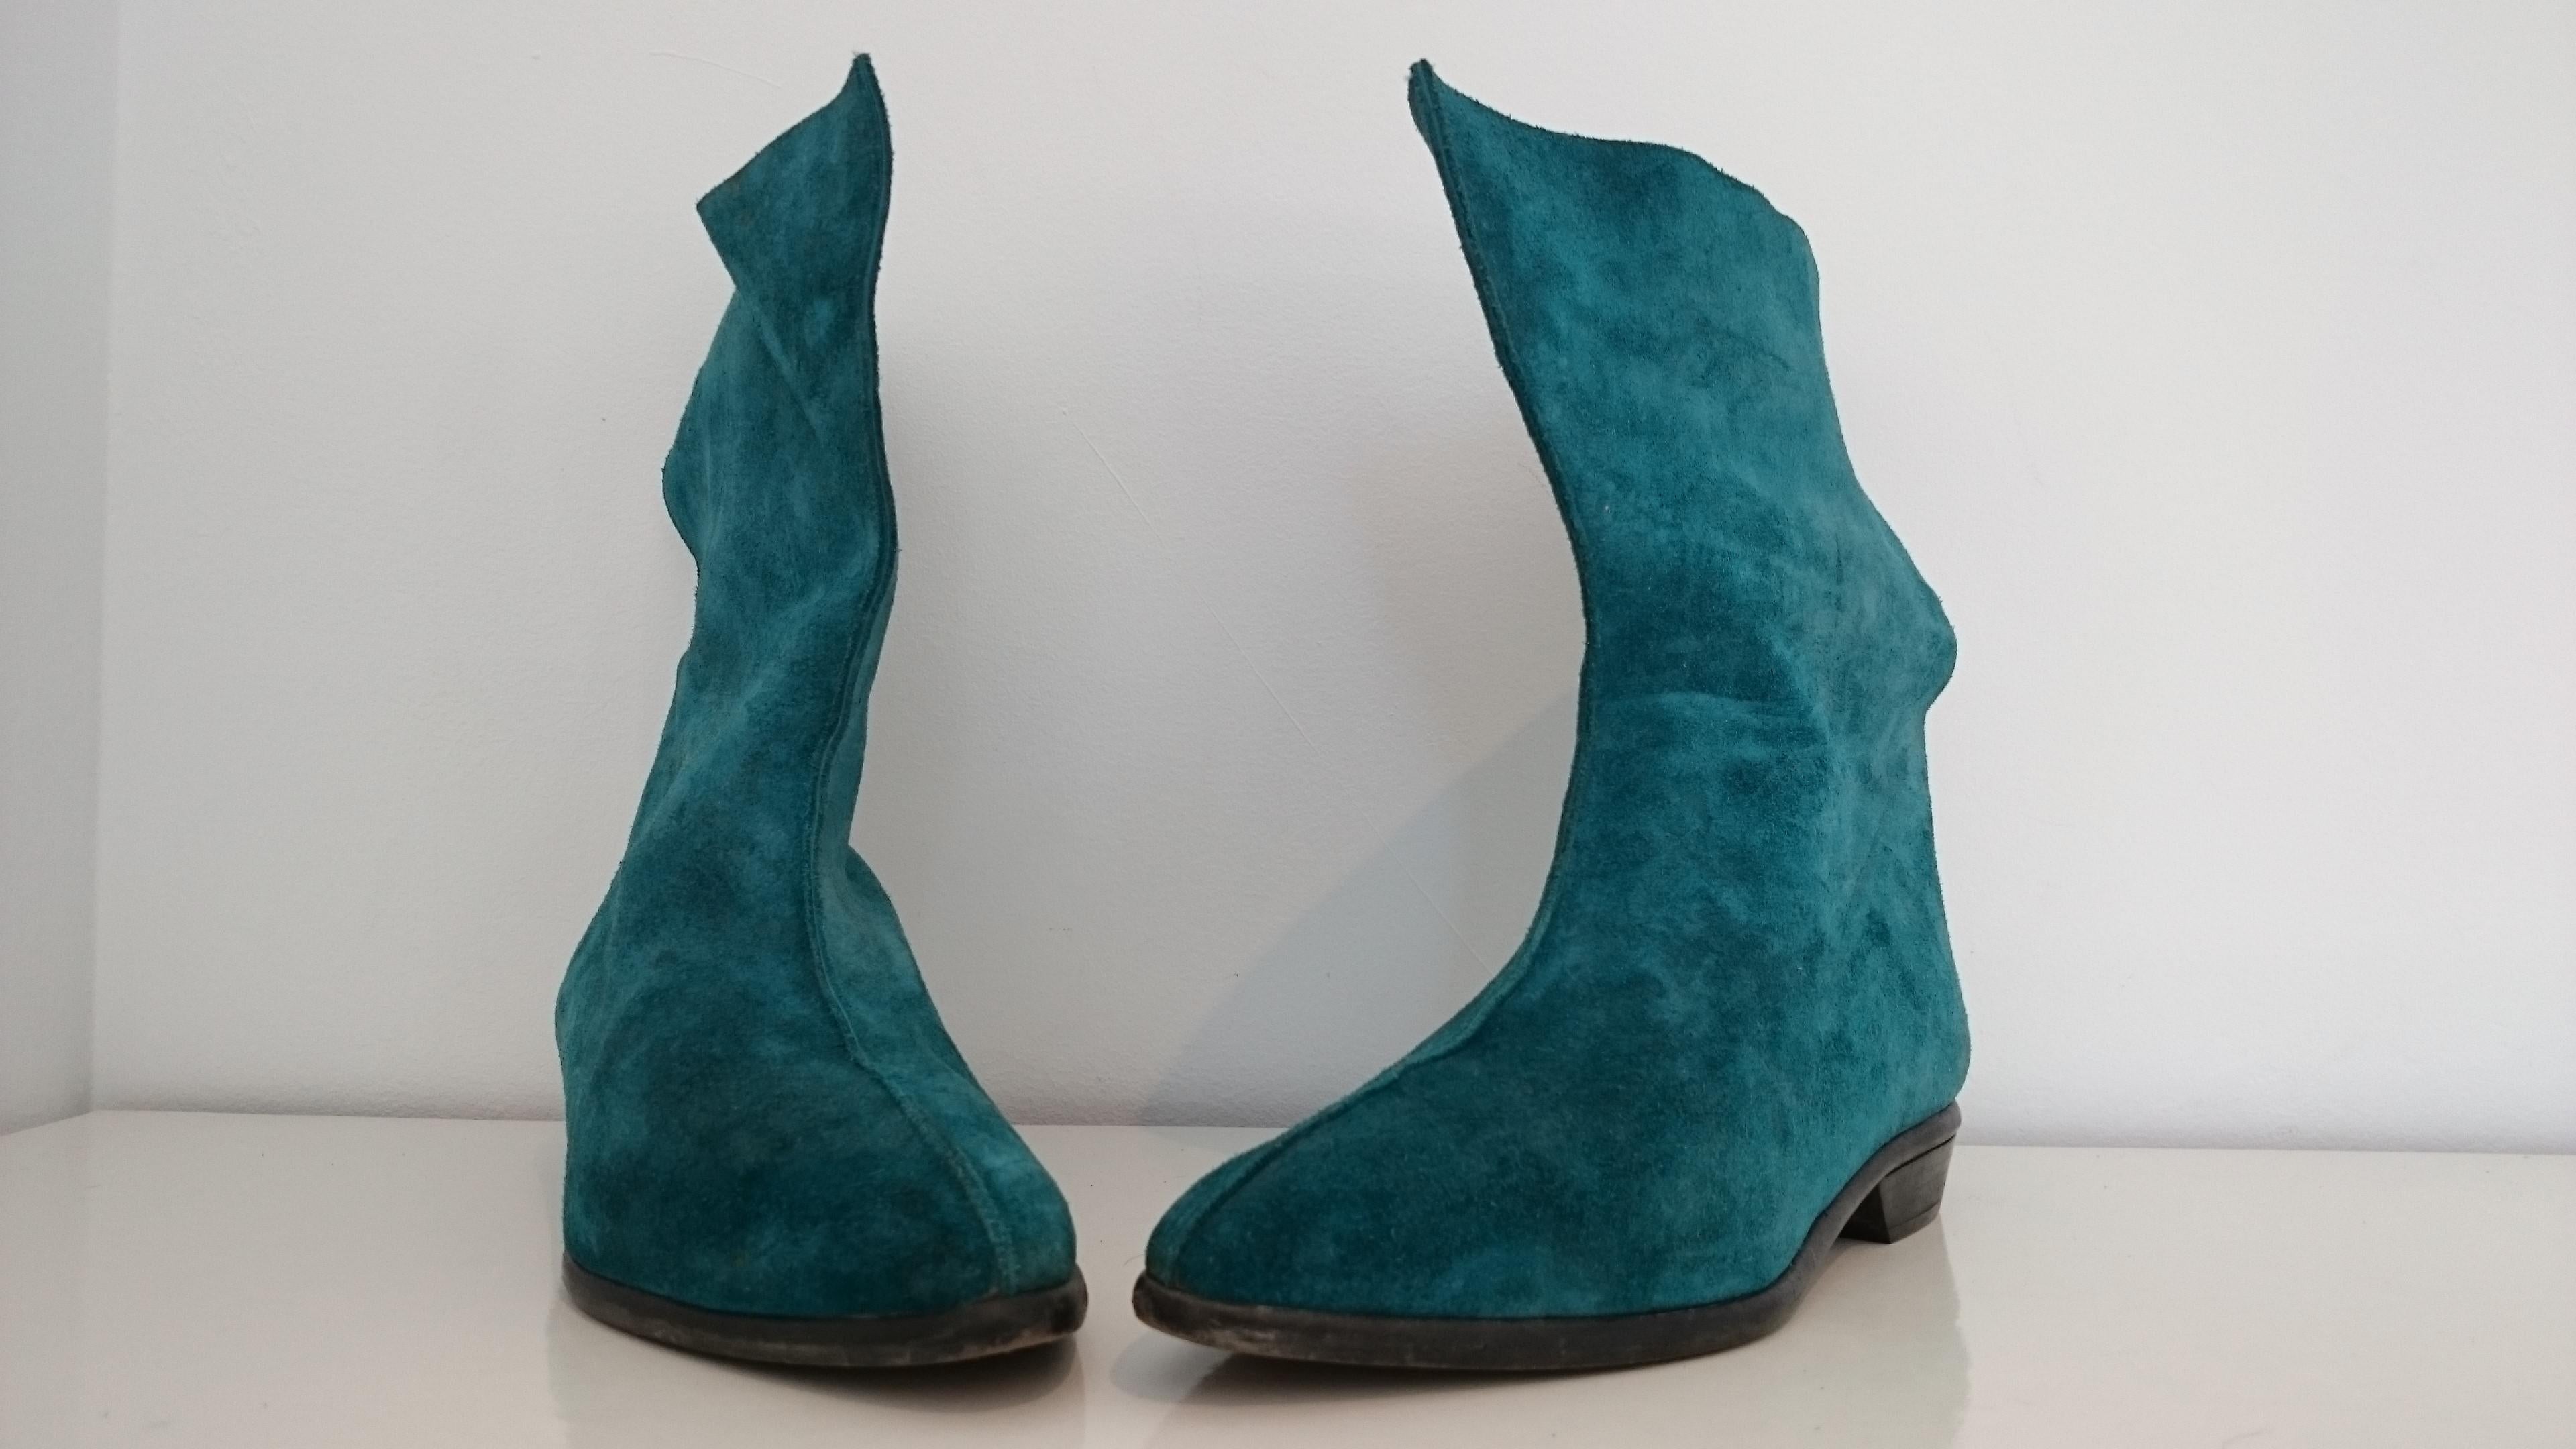 Walter Steiger Suede Boots
Beautiful, rare and unique design.
Color: Blue
Excellent conditions, practically new.
Boots height: 24.5 cm
Heel height: 2 cm
Size 39 (EU)
Made in Italy
